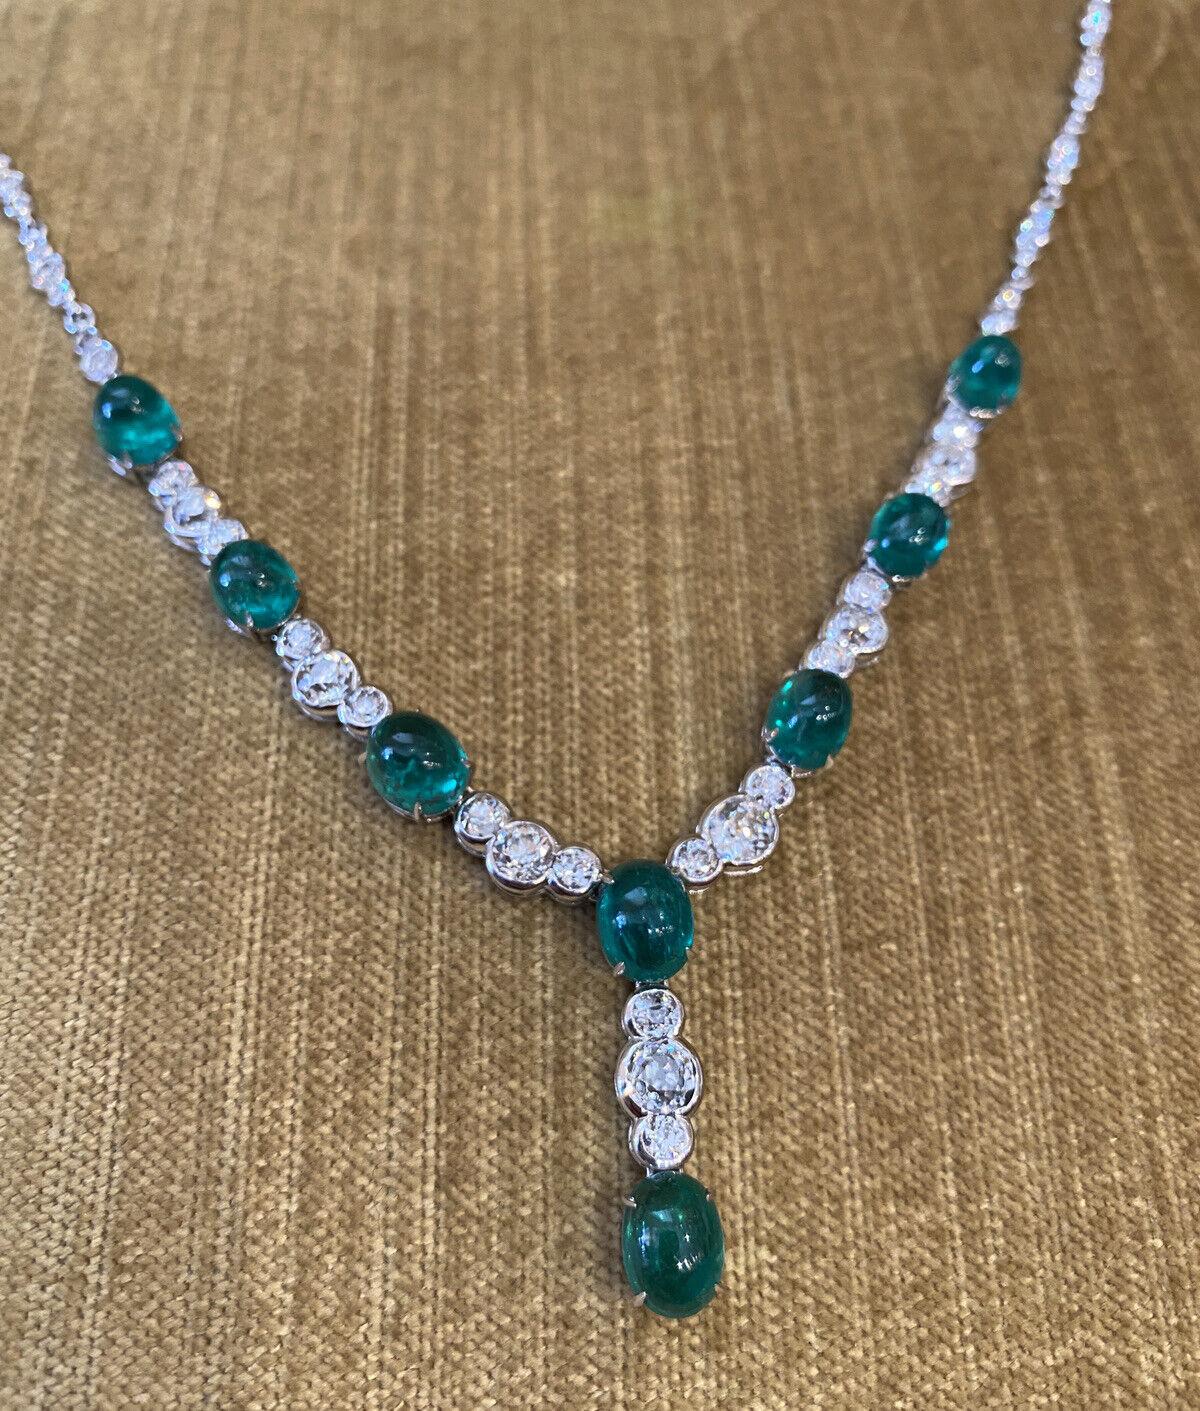 Cabochon Emerald and Old Cut Diamond Y-Drop Necklace in 18k White Gold

Emerald and Diamond Necklace features 8 Deep Green Round and Oval shaped Cabochon Emeralds set with Round Old Cut and Round Brilliant Diamonds in 18k White Gold

Total weight of